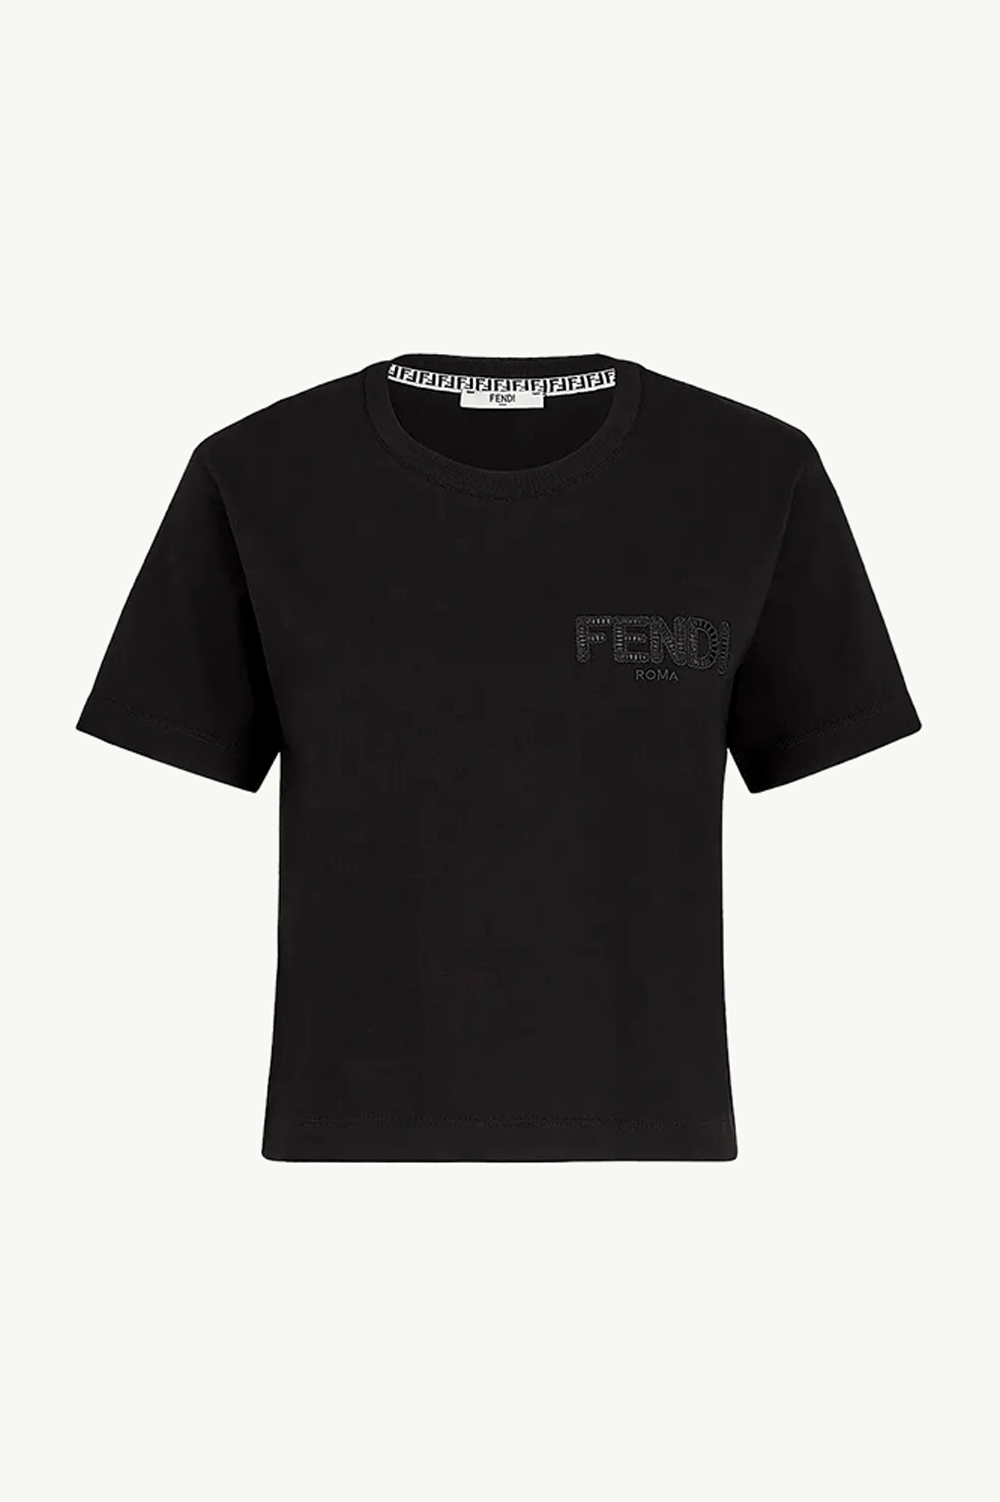 FENDI Women A Jour Embroidered Logo Cropped T-Shirt in Black 0